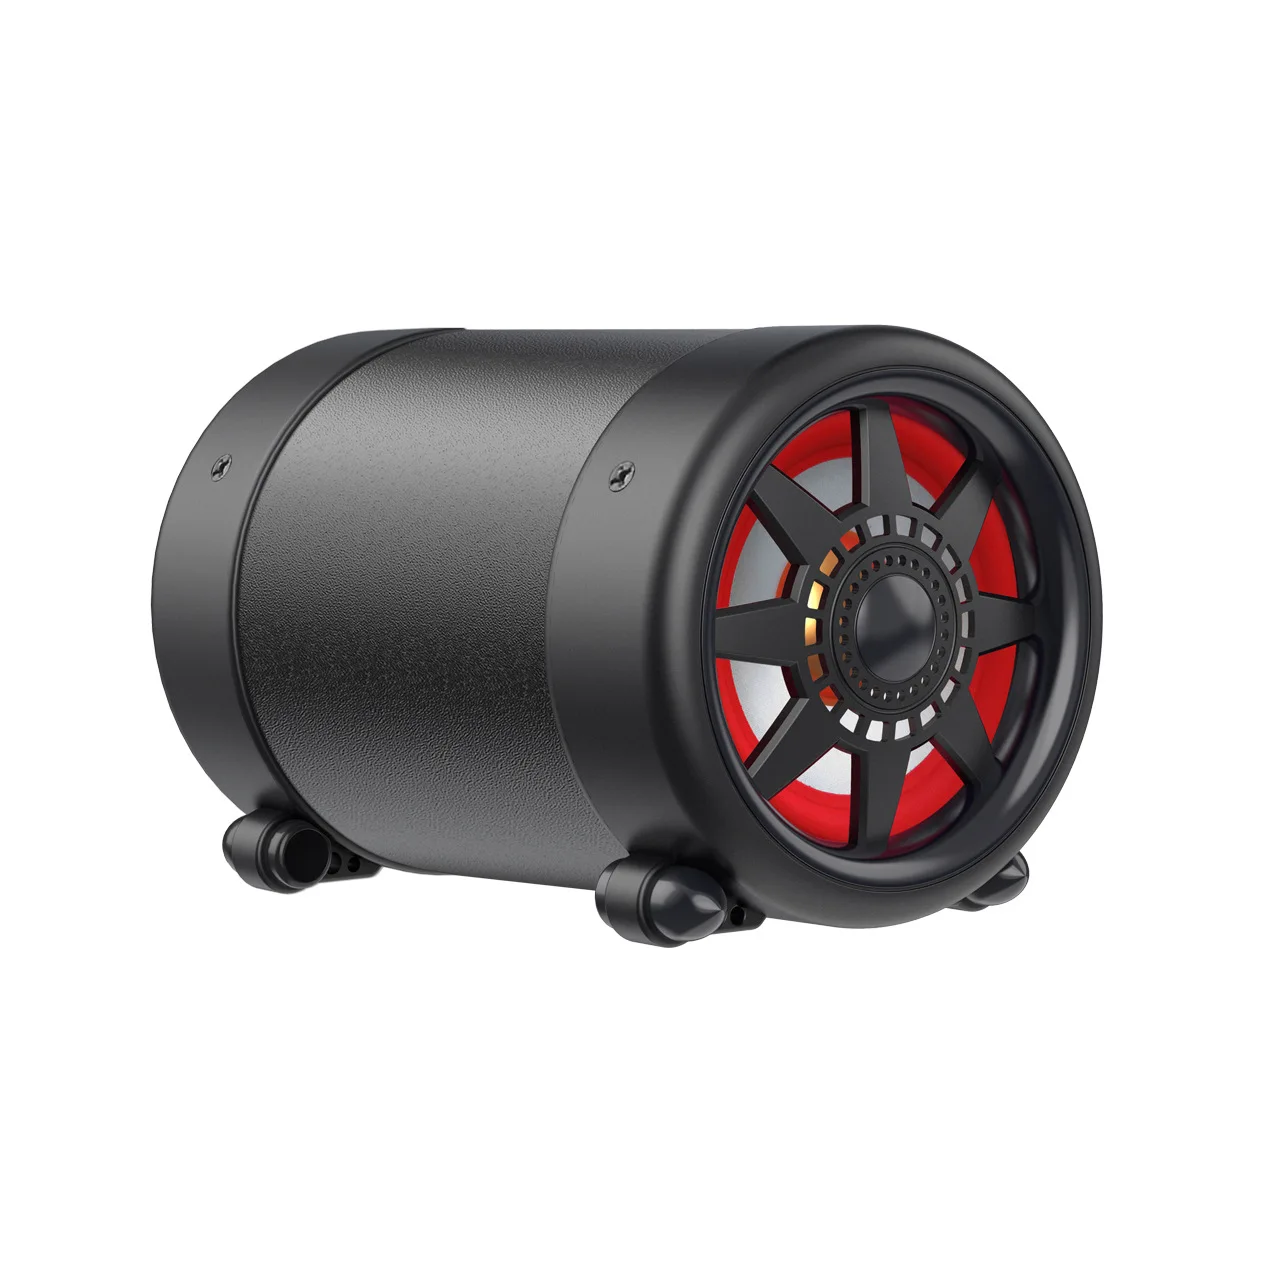 4-Inch New Round 12V Motorcycle Electric Vehicle Speaker Card U Disk Audio Car Subwoofer Audio